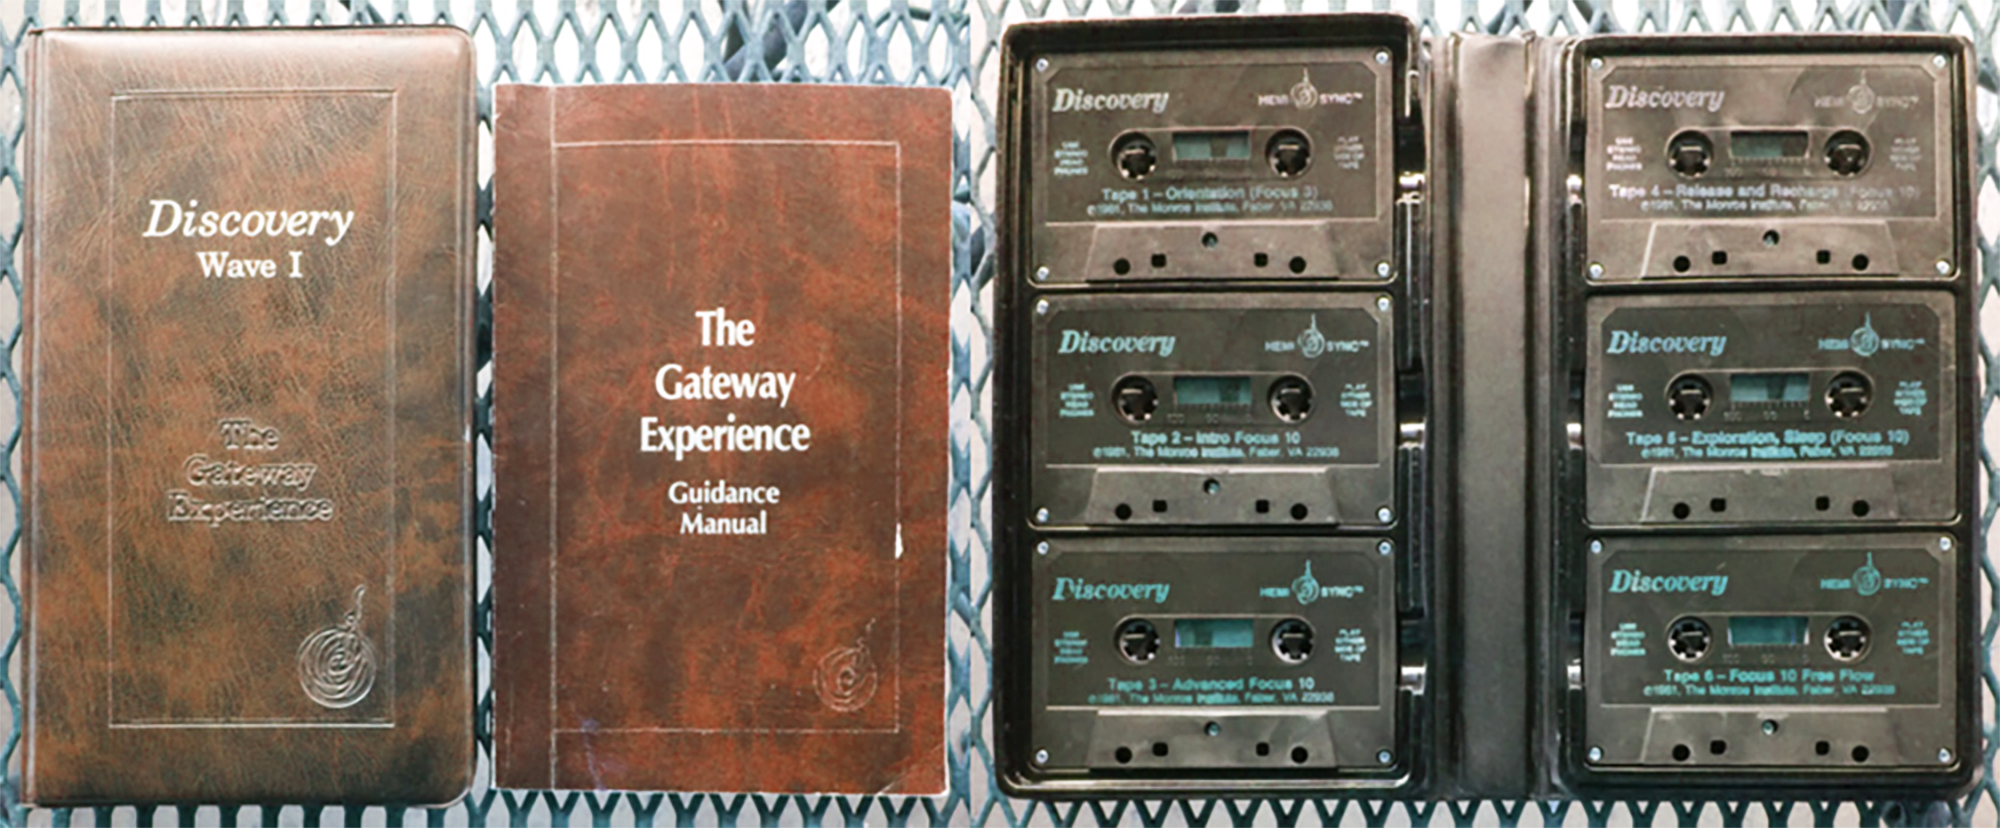 the Gateway Experience tapes